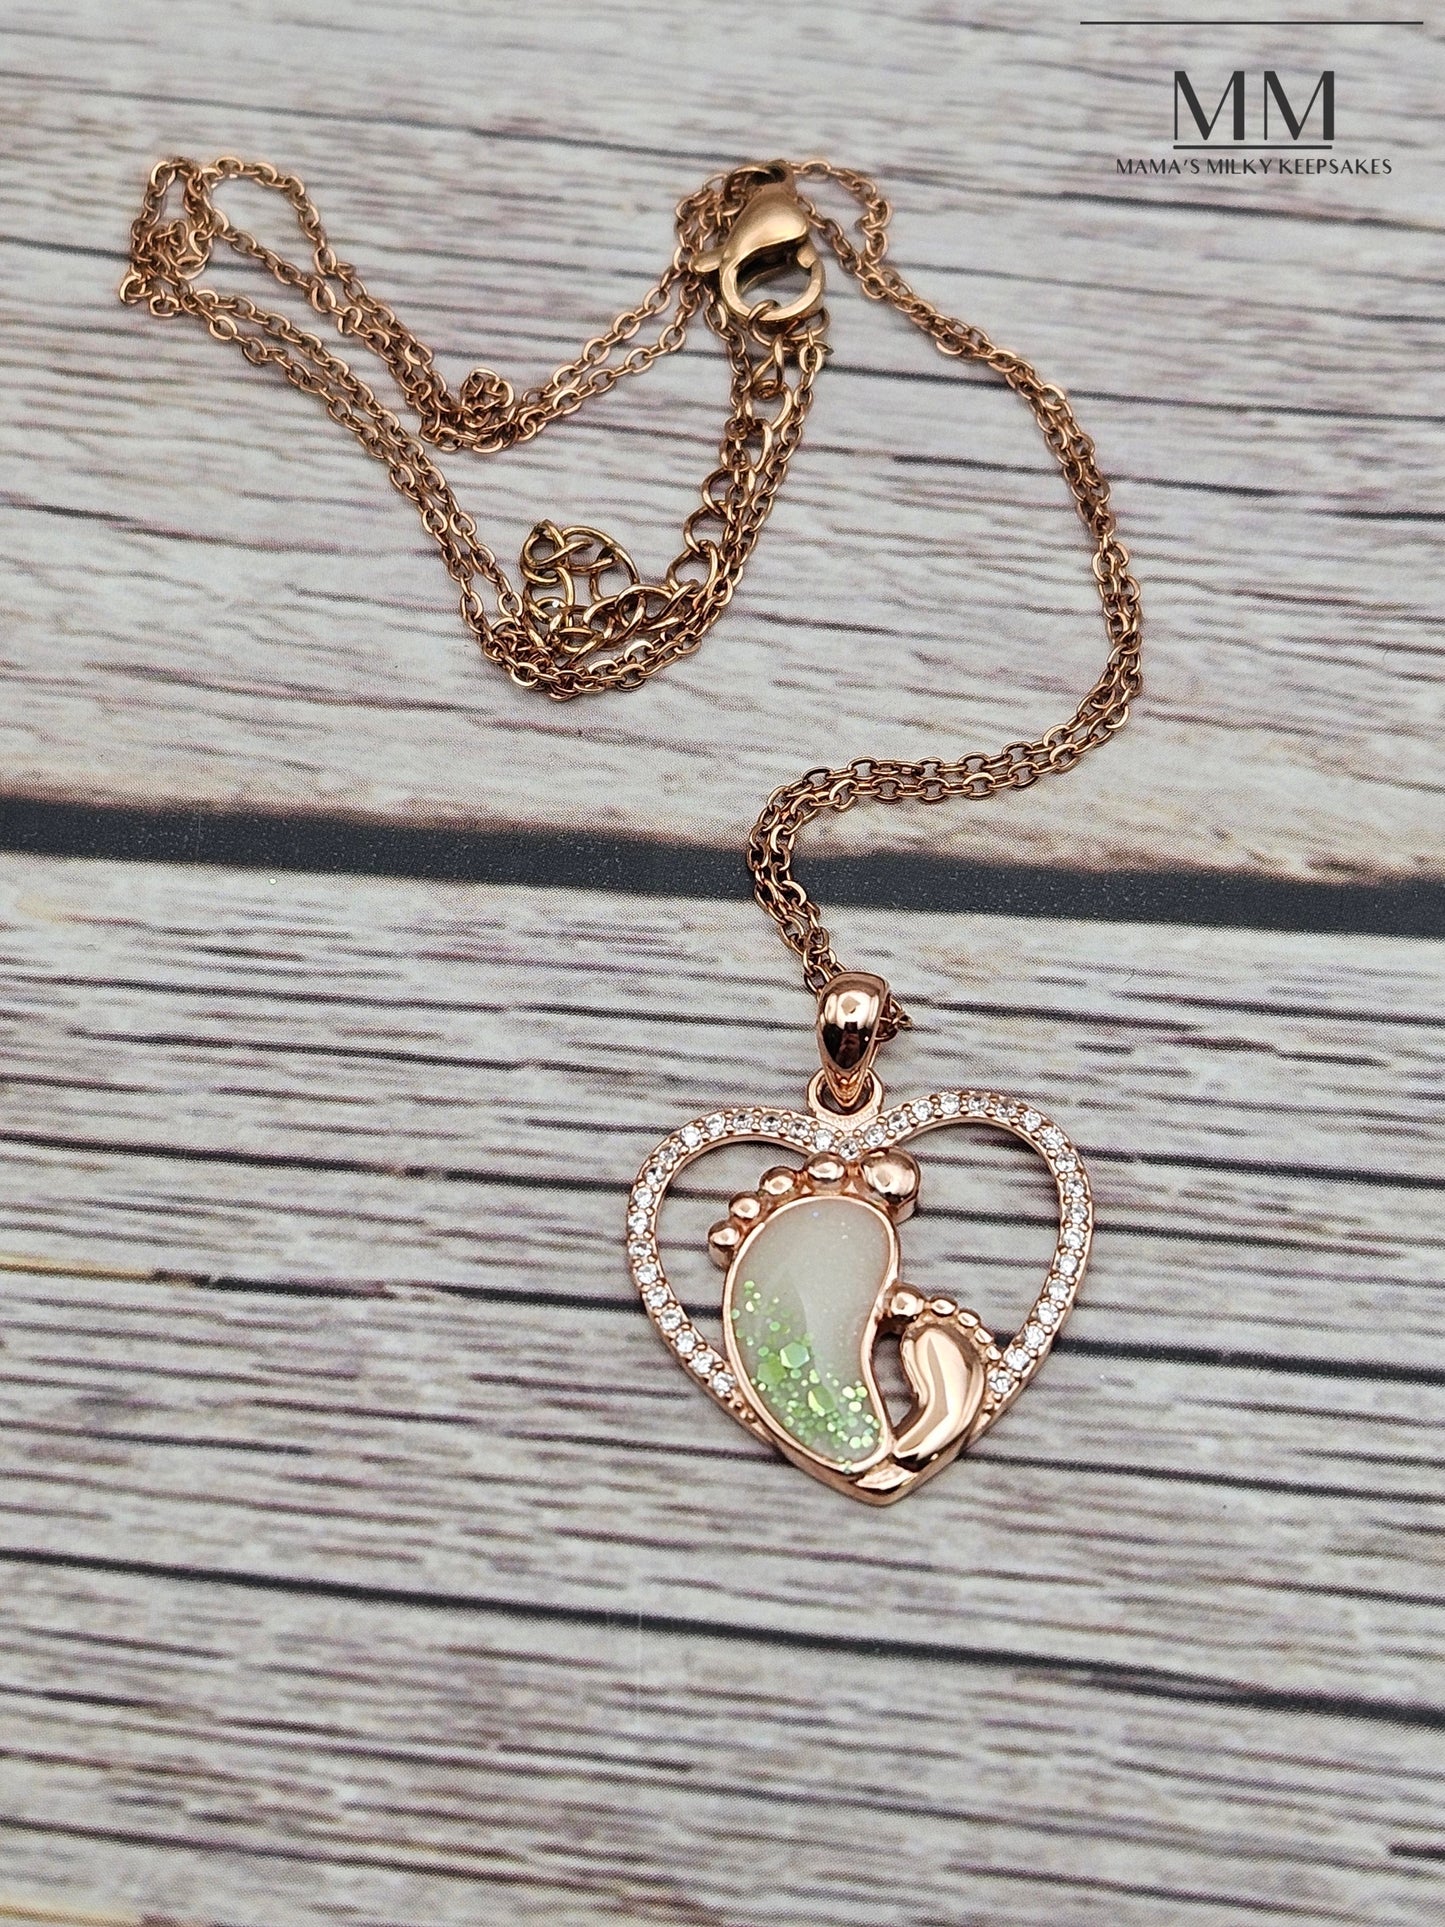 Forevermore Footprint Necklace